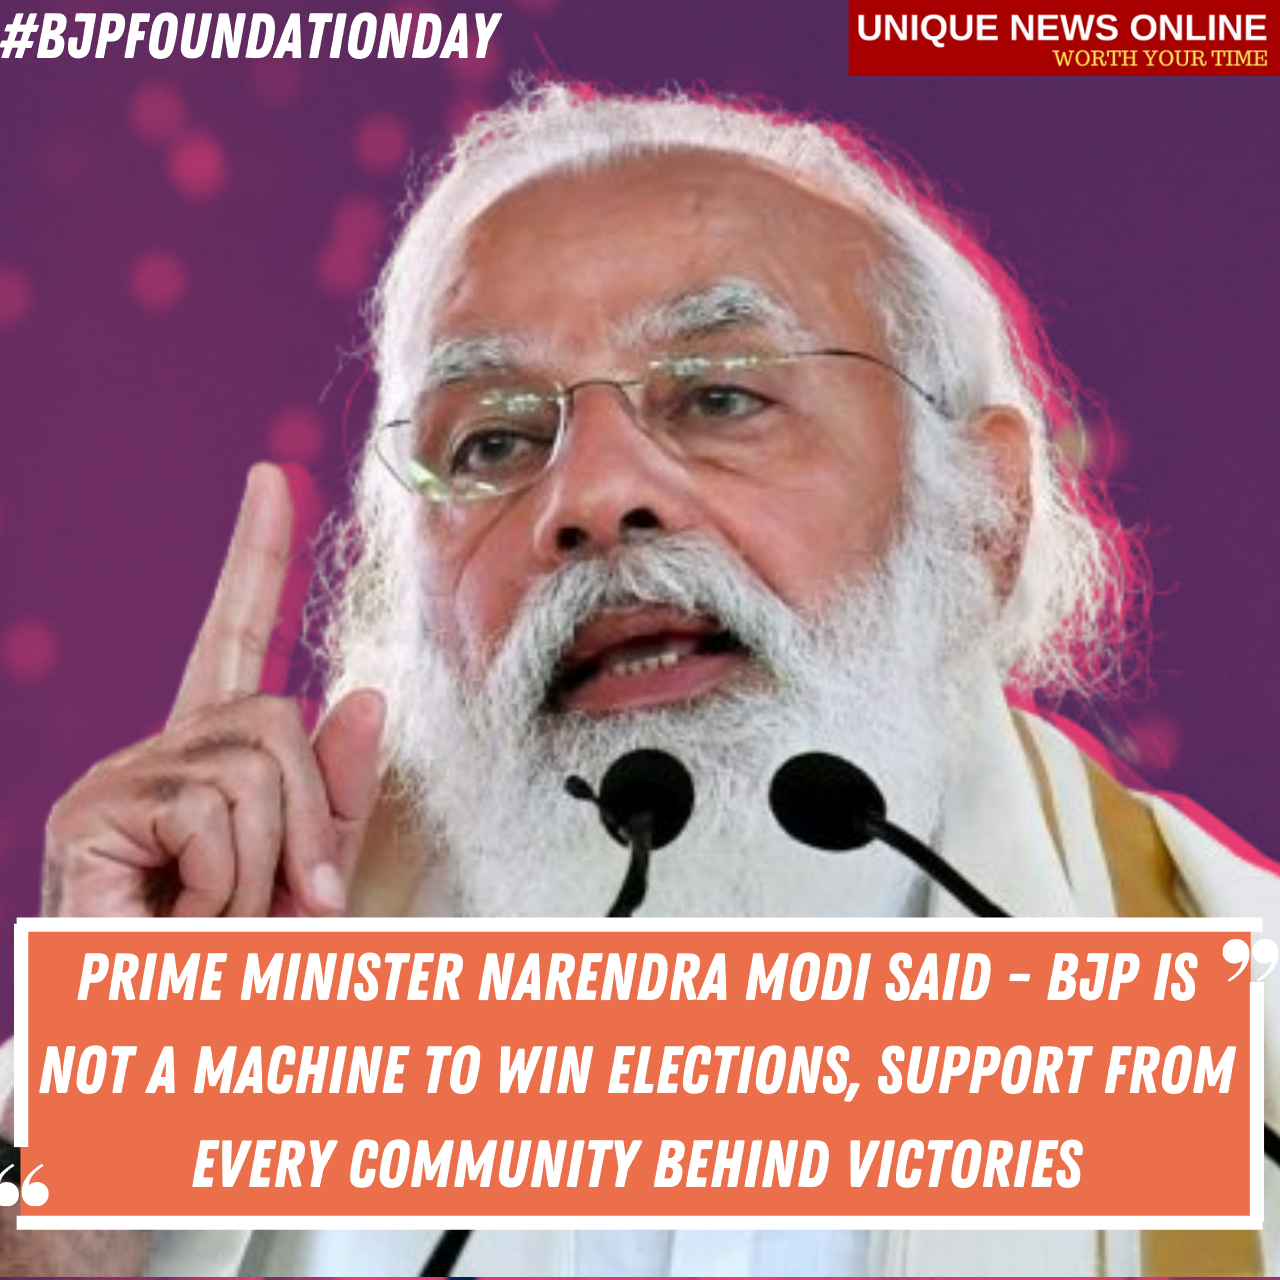 41st BJP Foundation Day: Prime Minister Narendra Modi said - BJP is not a machine to win elections, support from every community behind victories